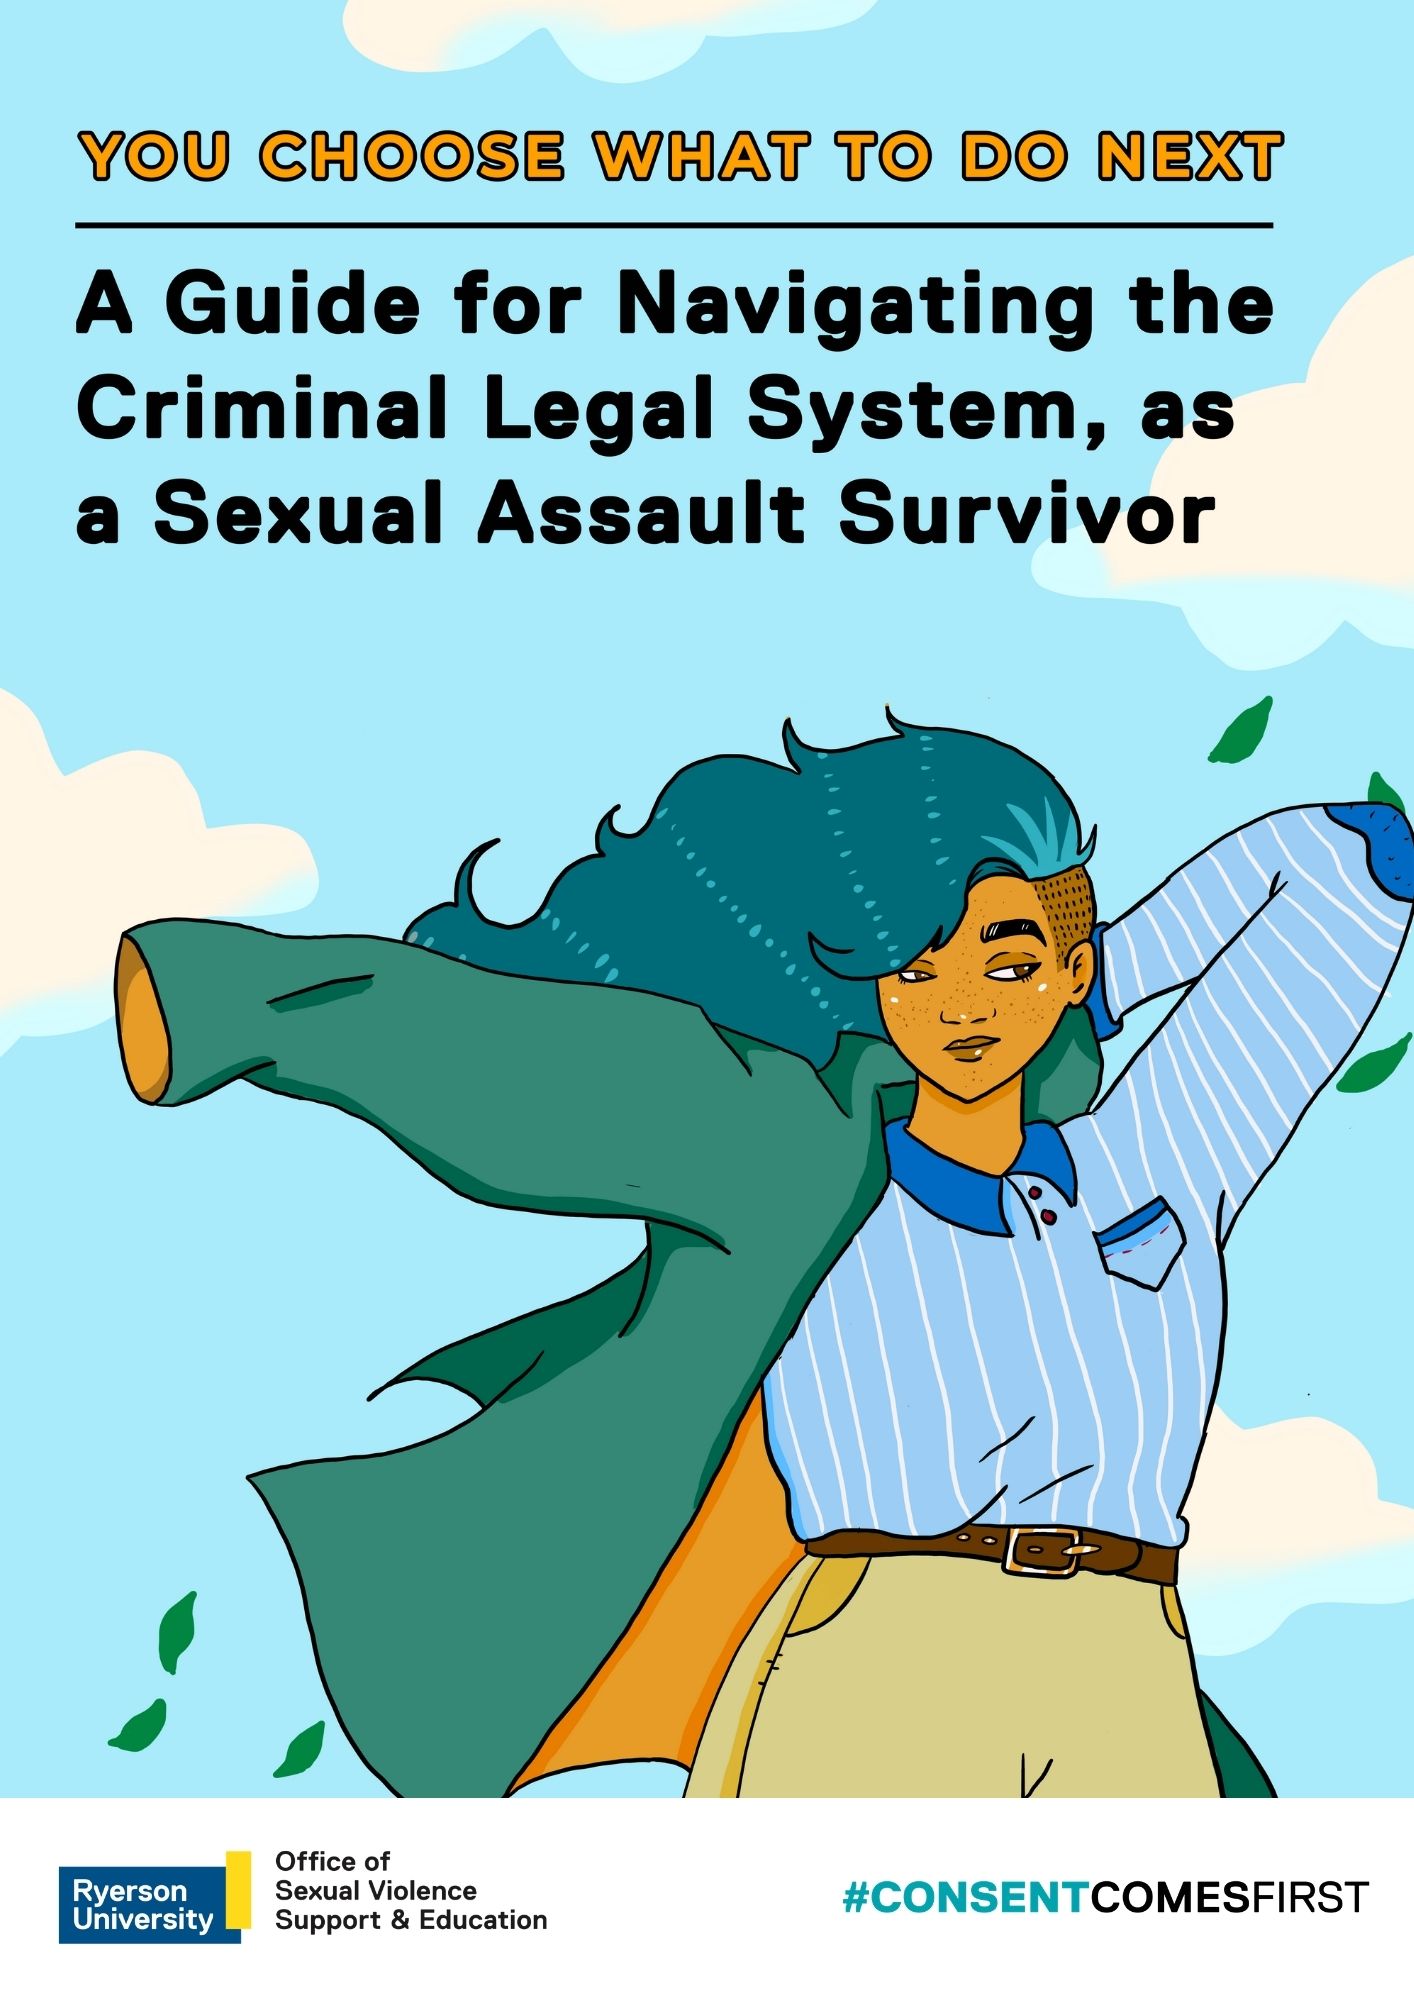 Front cover of the You Choose What To Do Next: Navigating the Criminal Legal System Guide. Illustration of character posing in front of a blue background with clouds.